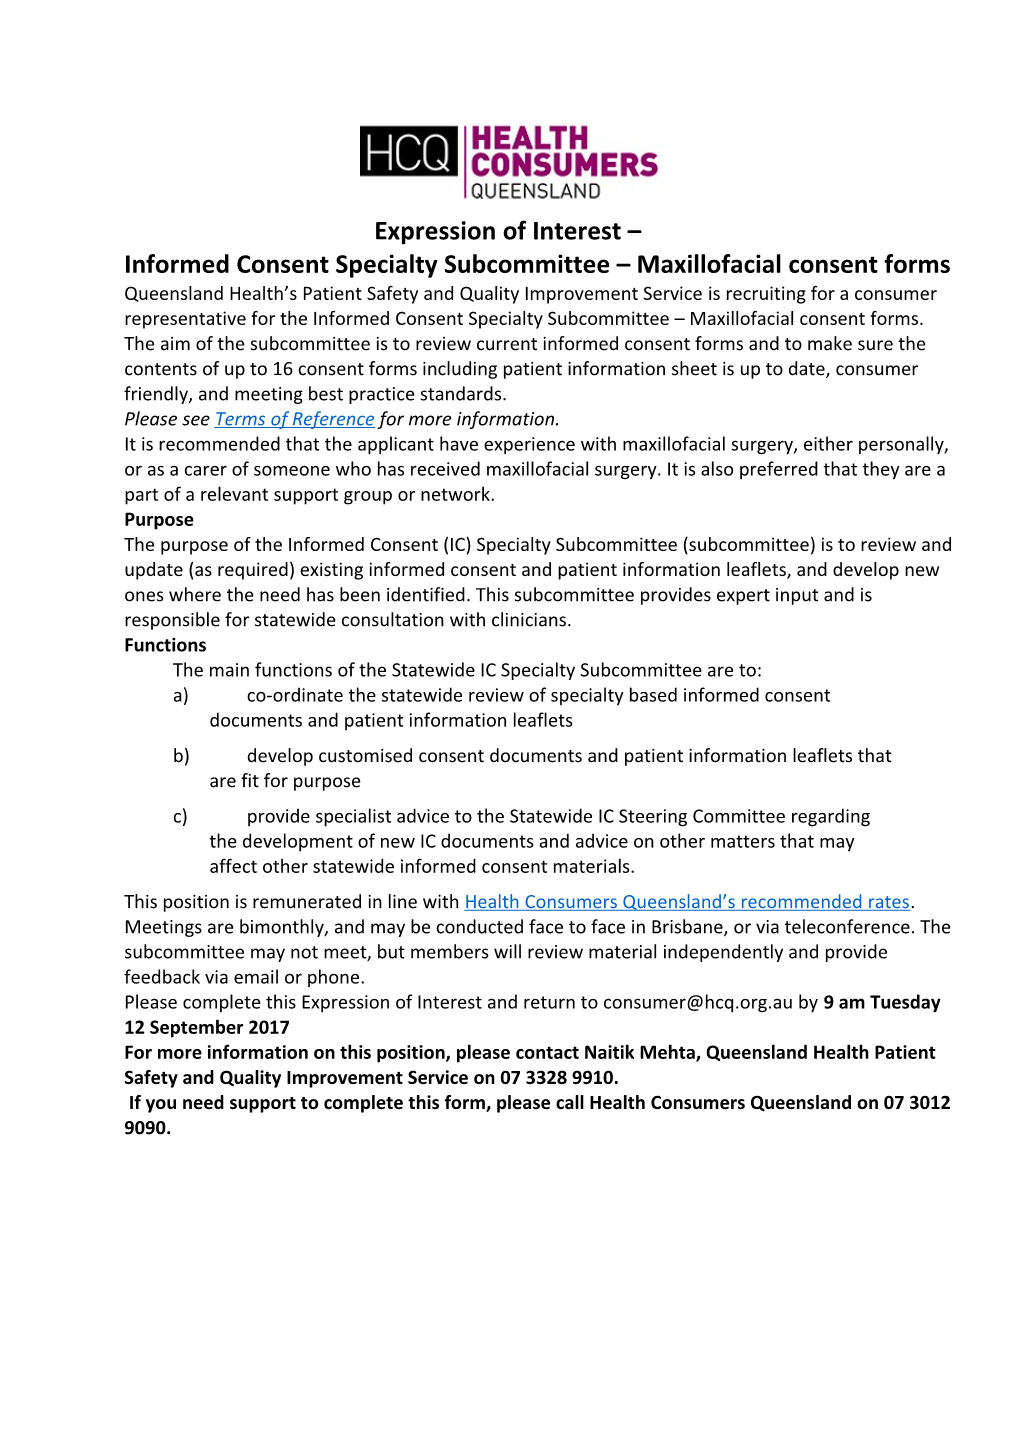 Informed Consent Specialty Subcommittee Maxillofacial Consent Forms